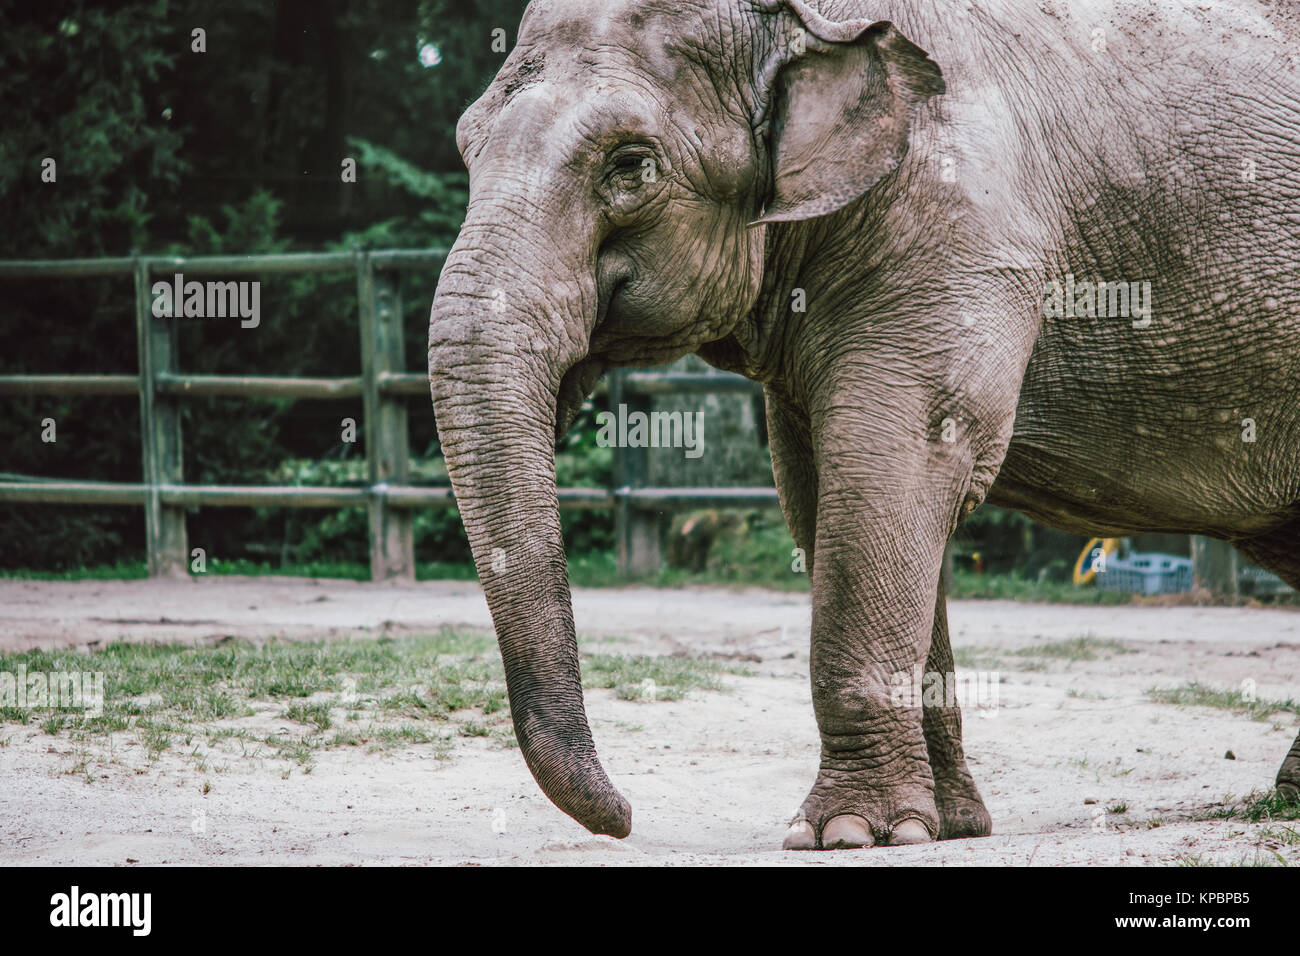 Asian elephant front closeup standing in an enclosure Stock Photo